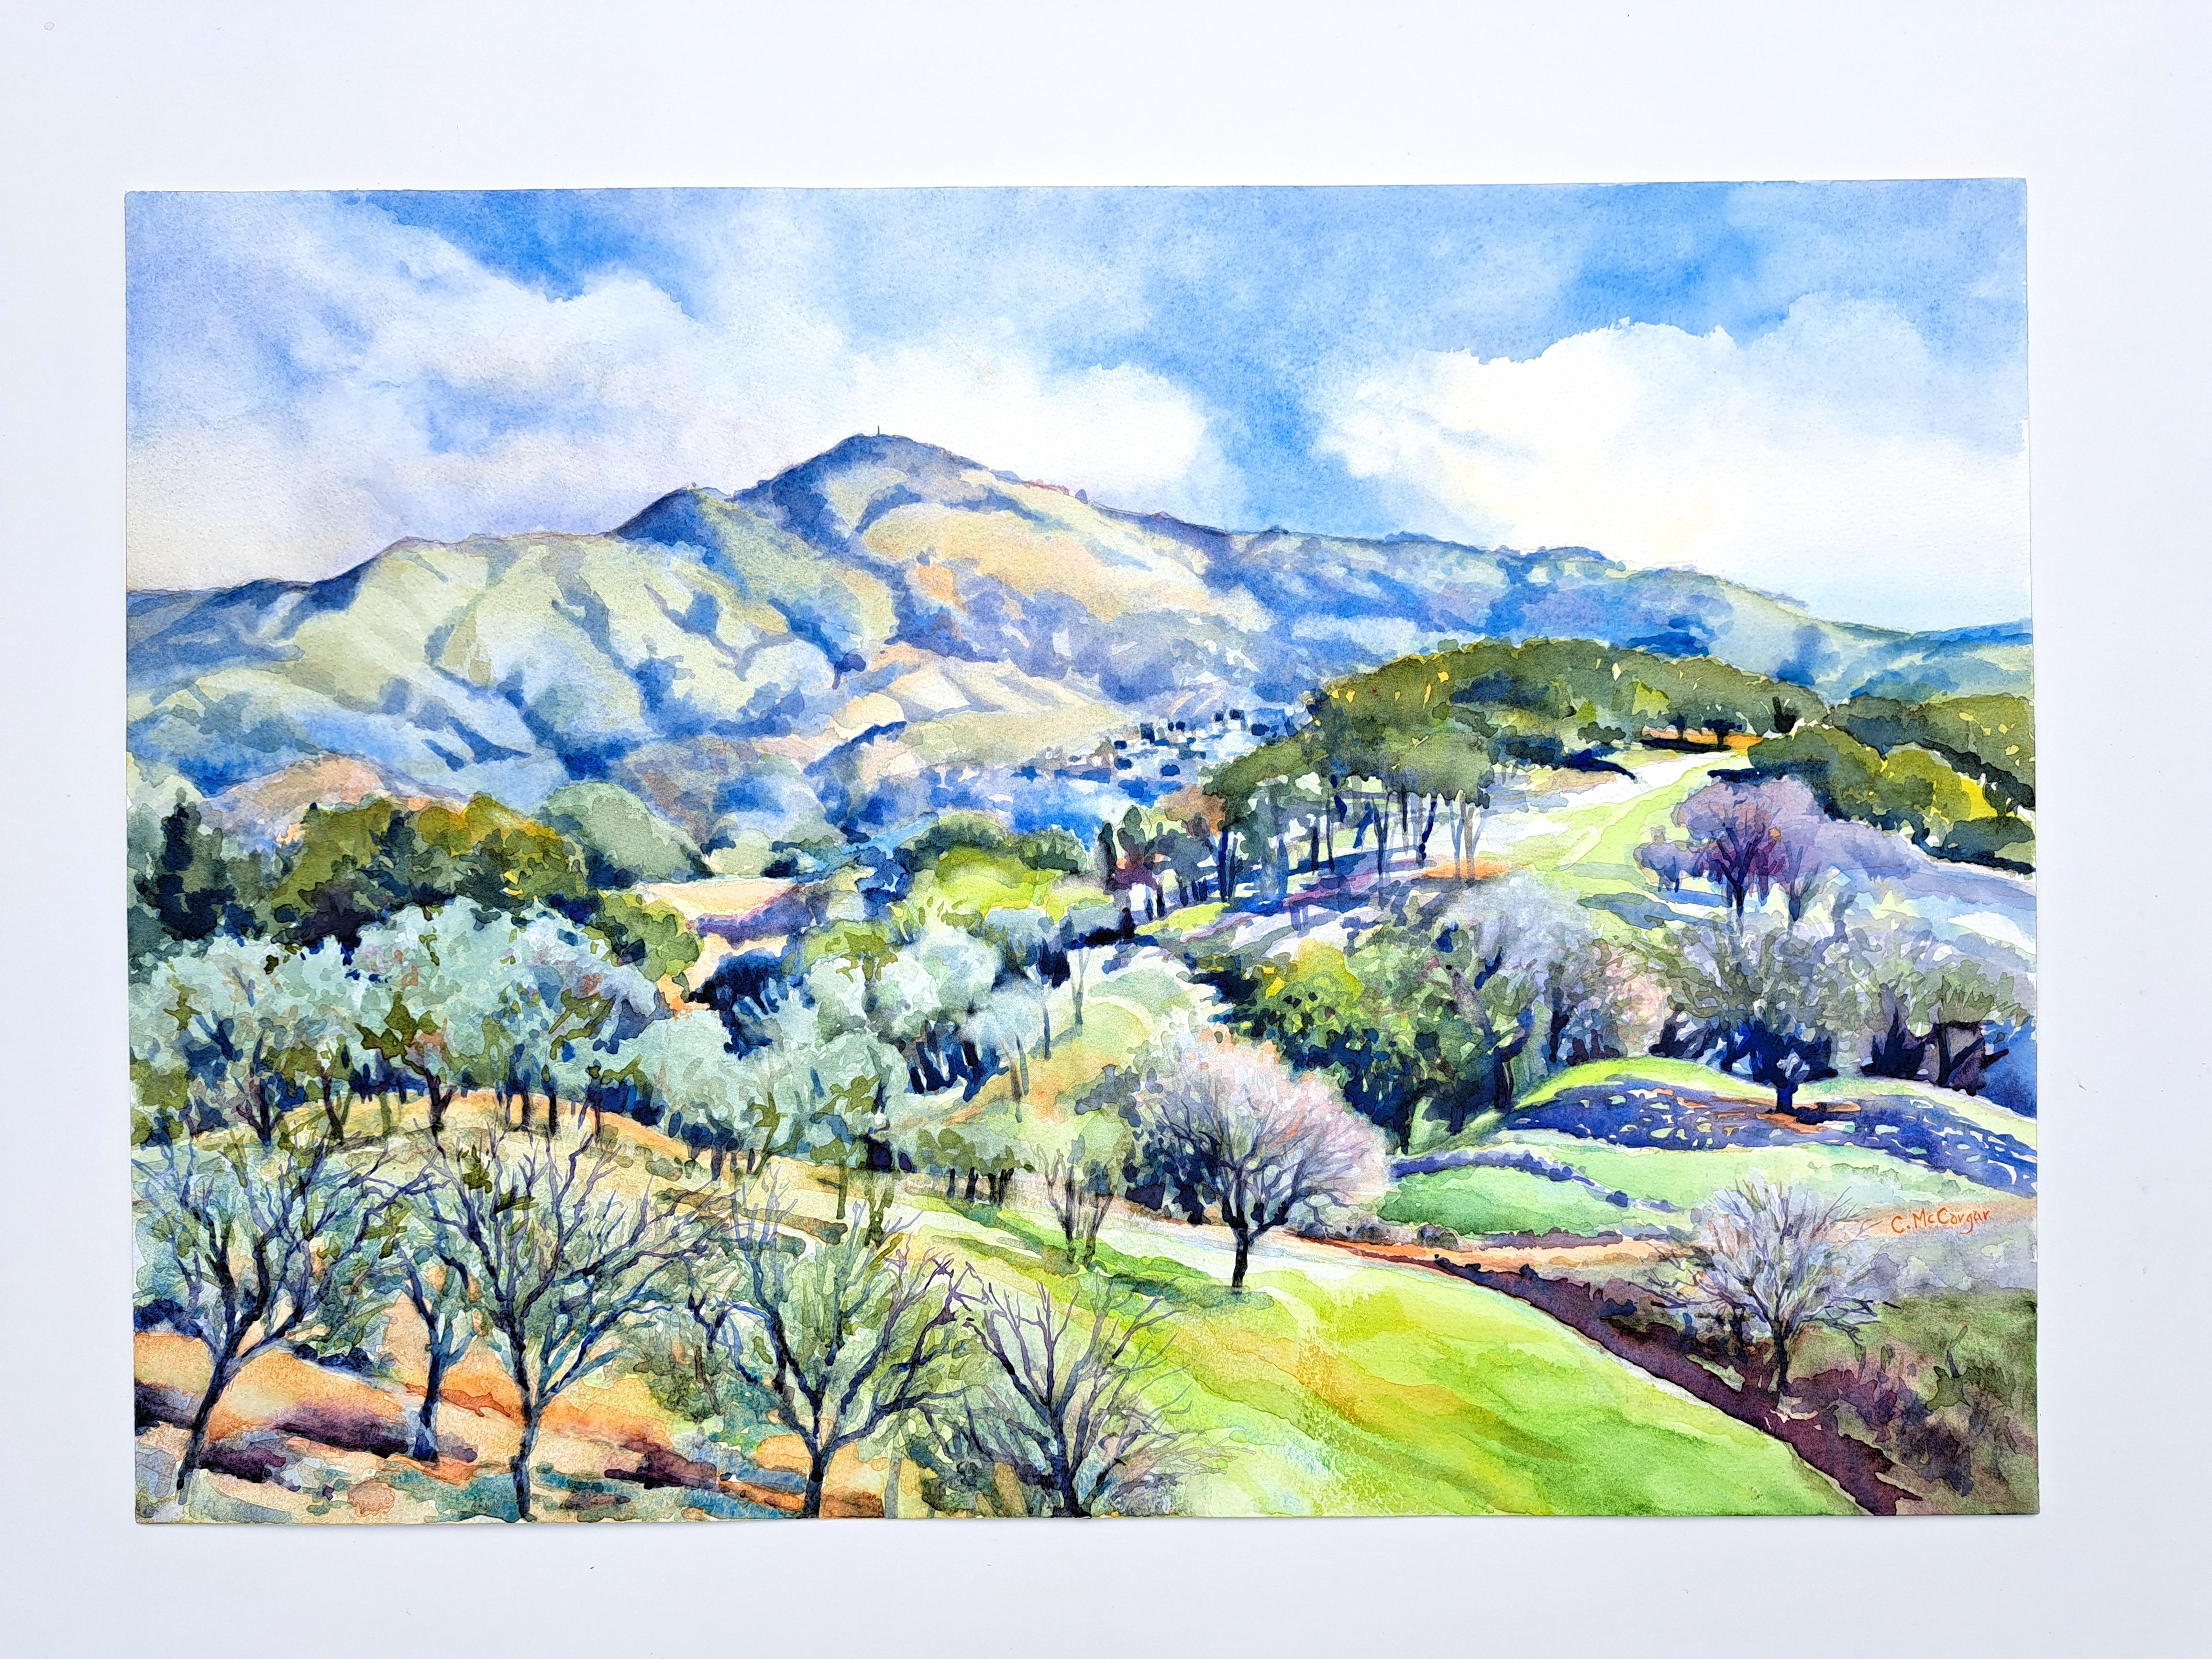 <p>Artist Comments<br>Well known for her landscapes, artist Catherine McCargar presents a view of Mt. Diablo and its surrounding foothills. The grand and proud mountain looks onto the verdant slopes and lush trees. The complementary and vibrant